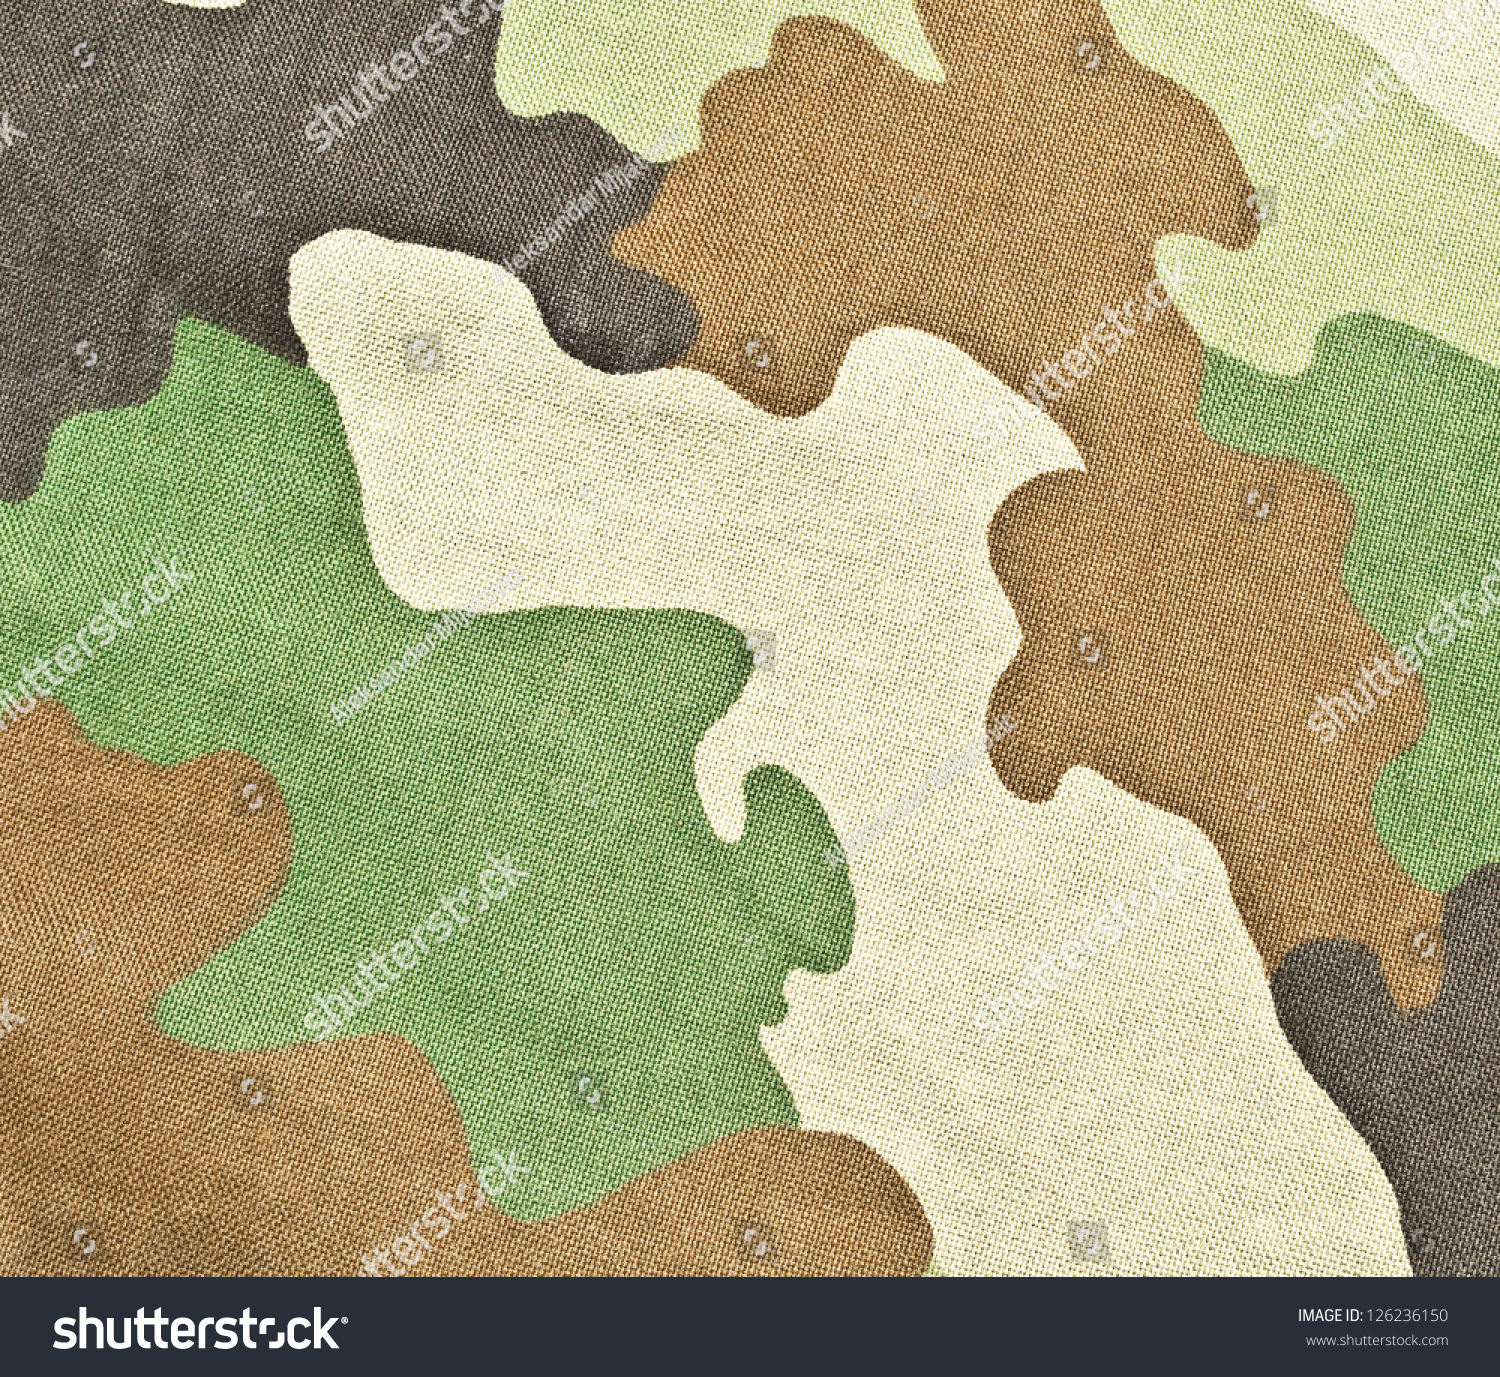 Military Texture - Camouflage Stock Photo 126236150 : Shutterstock